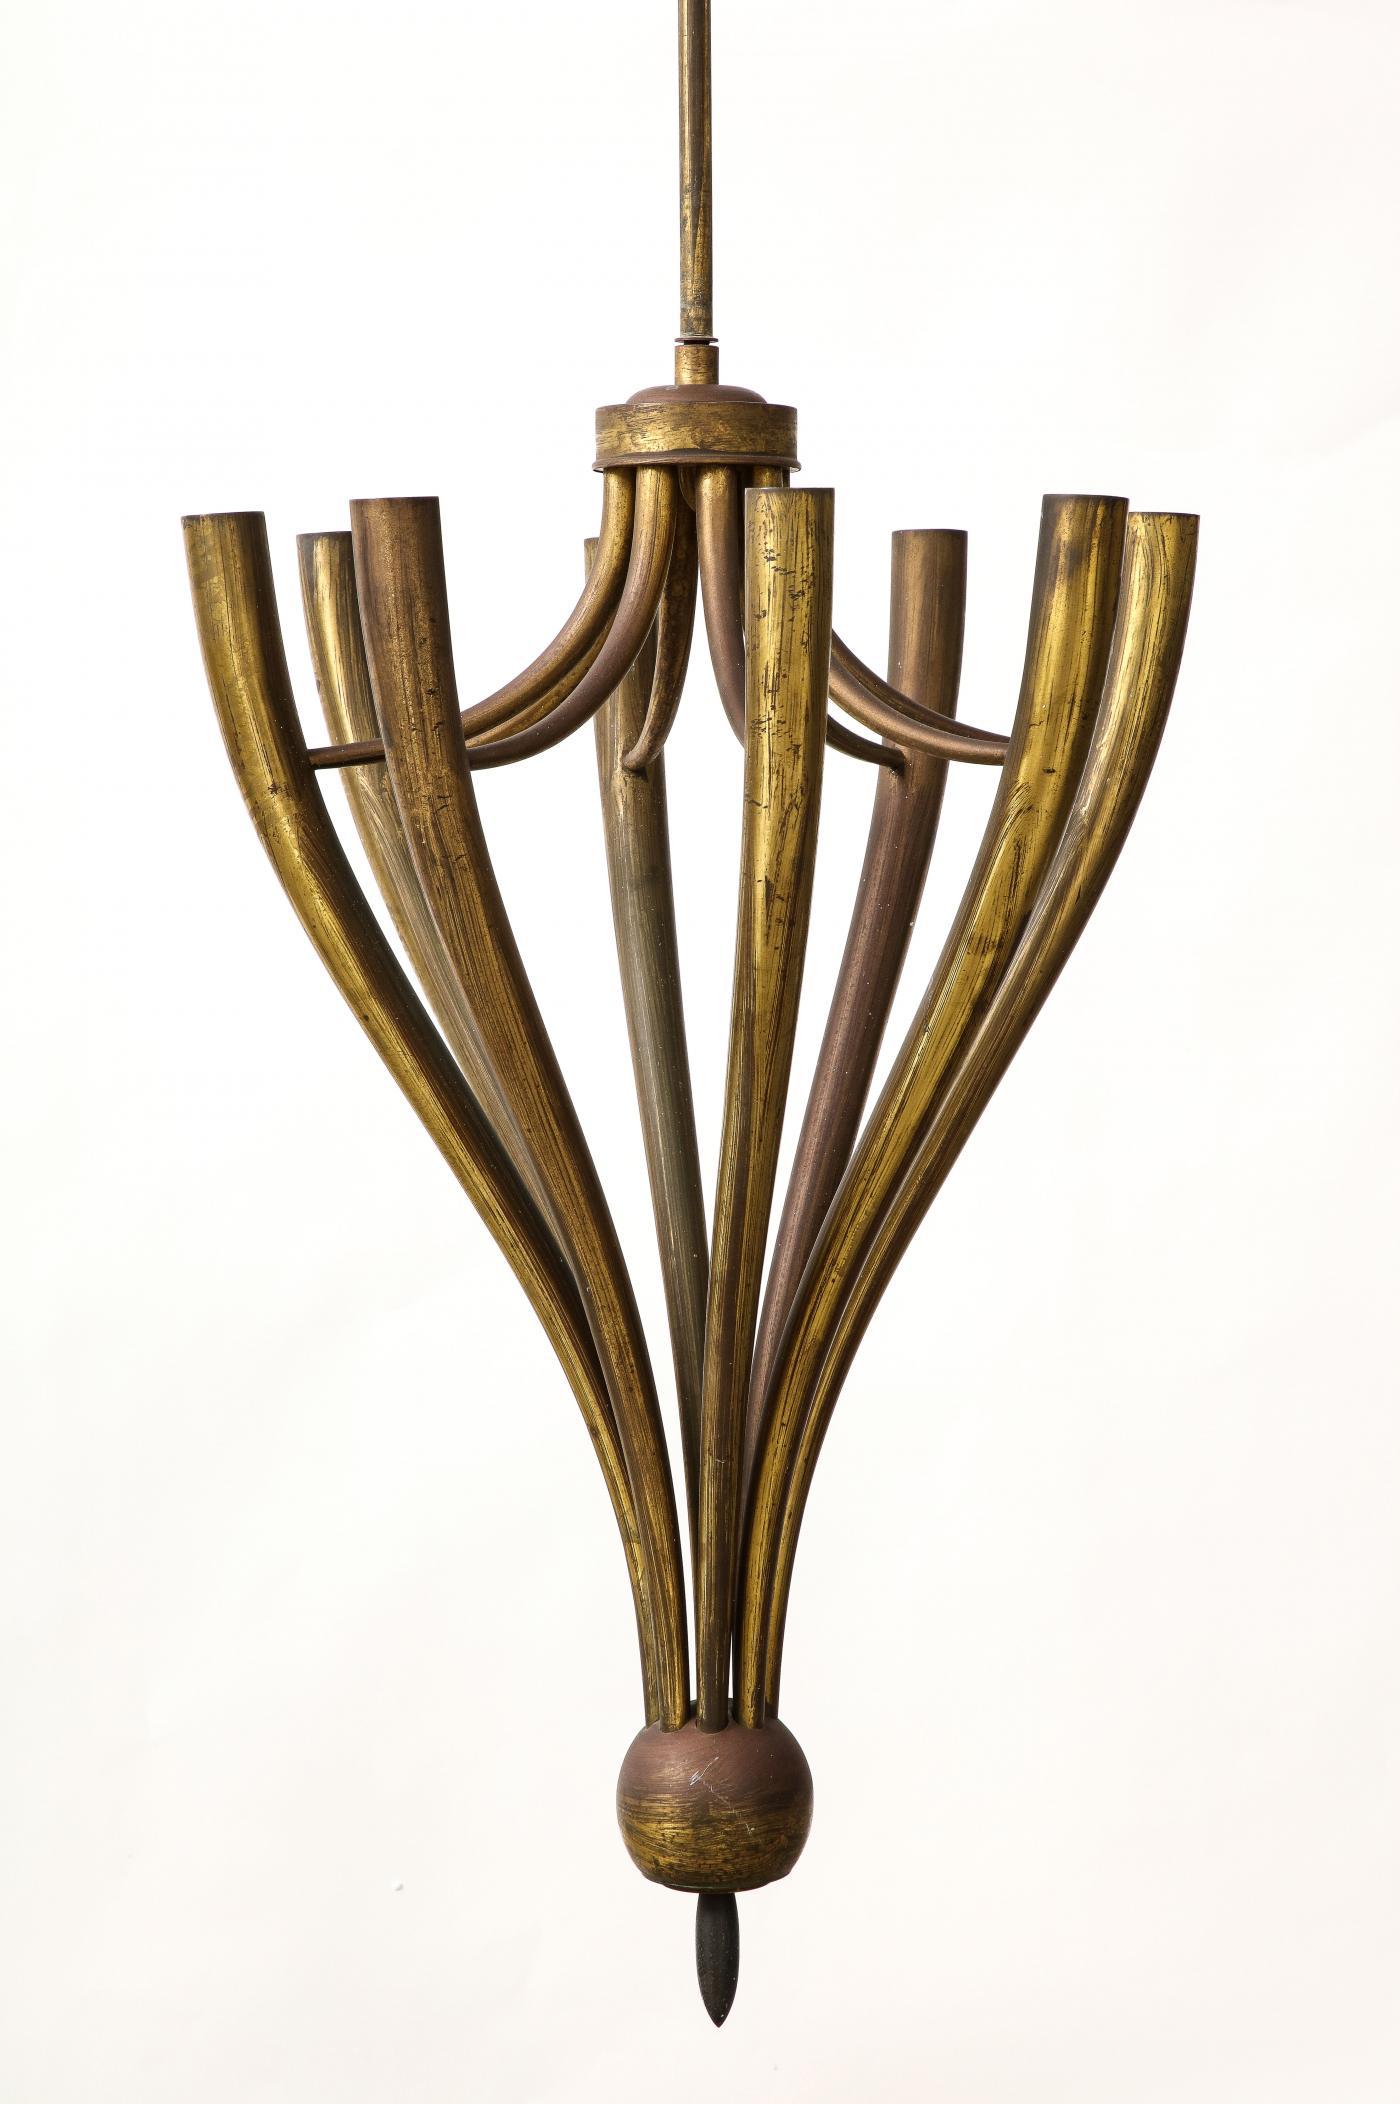 Eight-Arm Patinated Brass Chandelier by Guglielmo Ulrich, Italy, c. 1950 For Sale 2